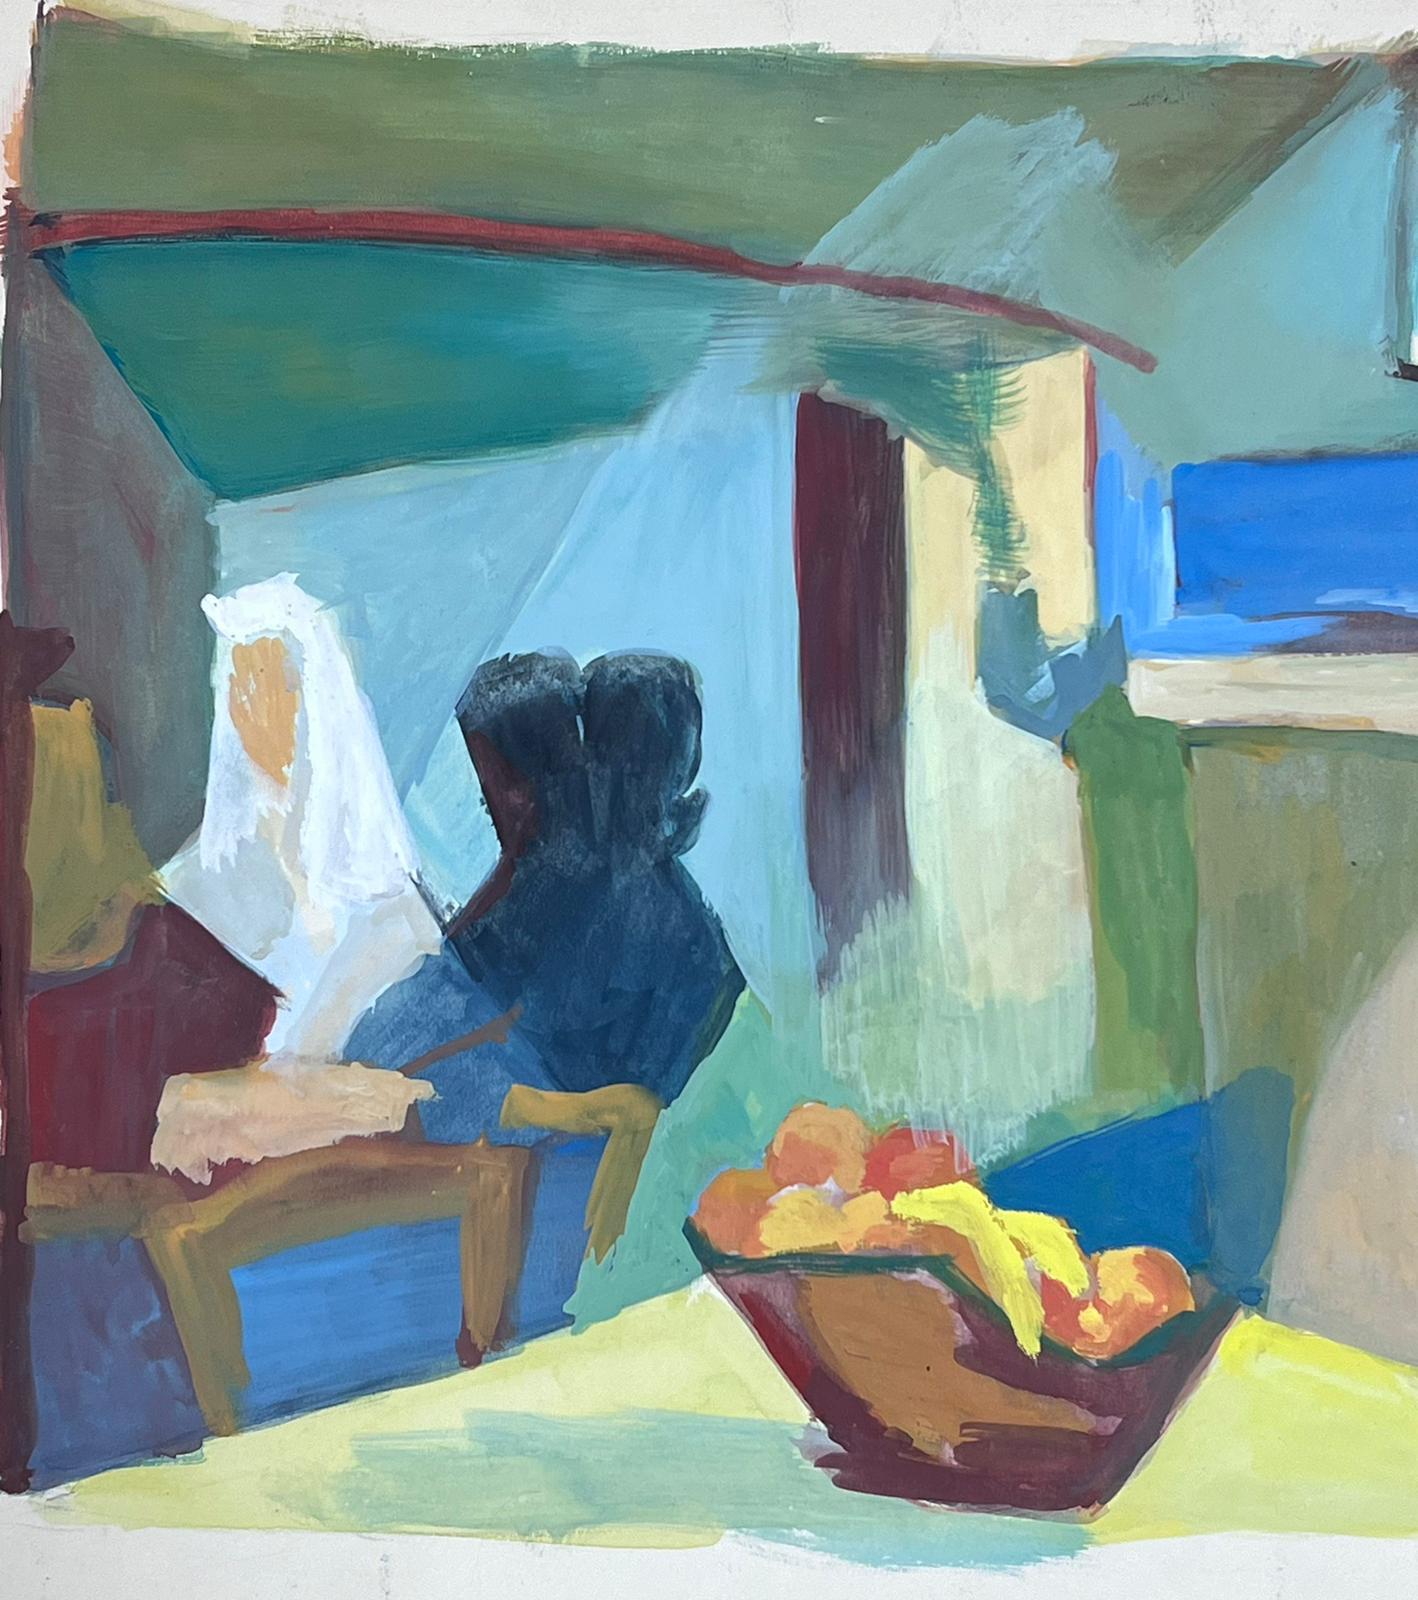 The Cafe Interior
by Guy Nicod
(French 1923 - 2021)
gouache on artist paper, unframed
painting : 20 x 26 inches
provenance: artists estate, France
condition: very good and sound condition